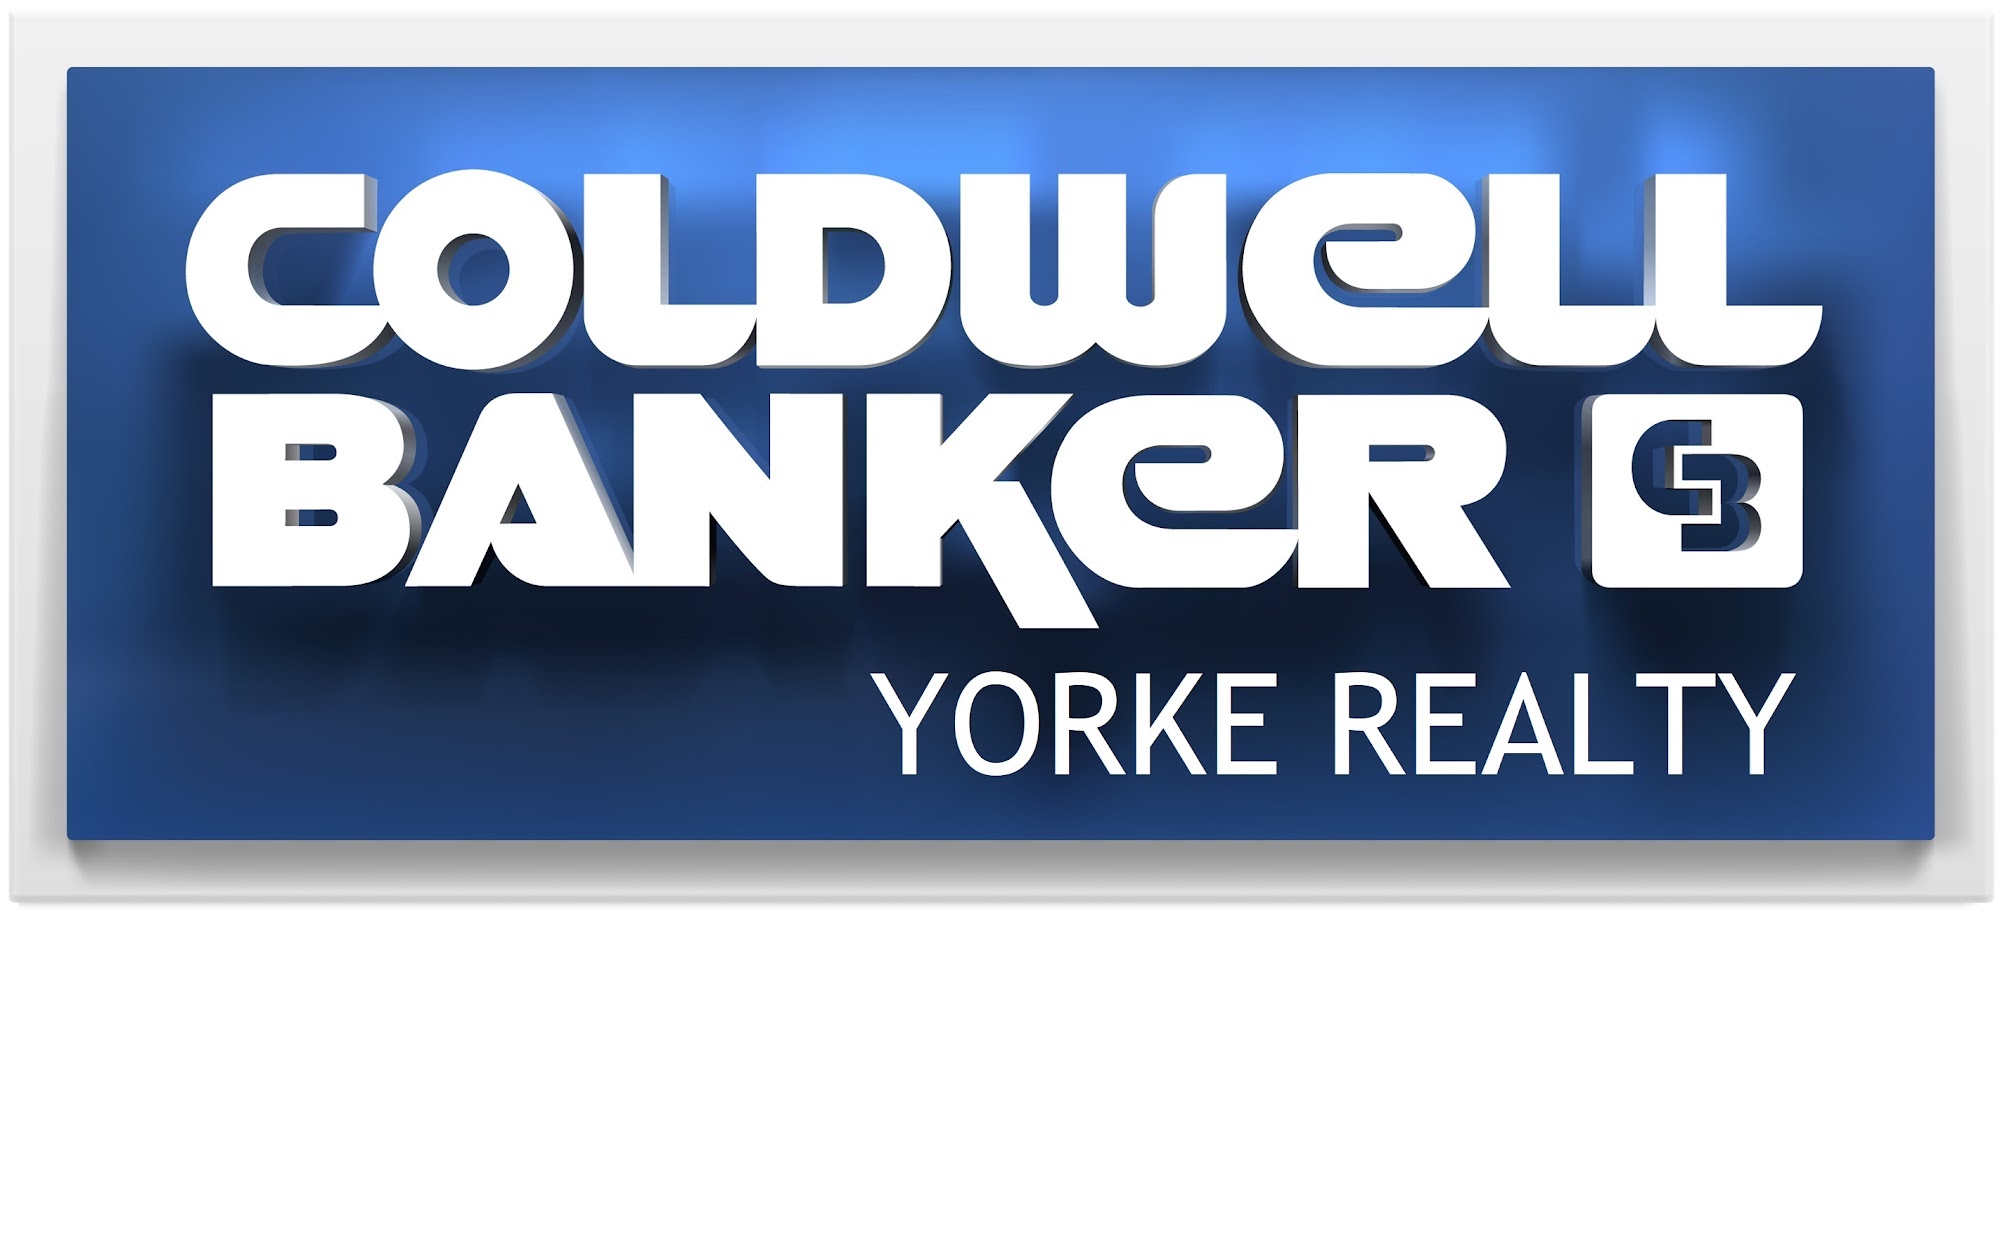 Coldwell Banker Yorke Realty 529 US-1 Ste 101, York Maine 03909